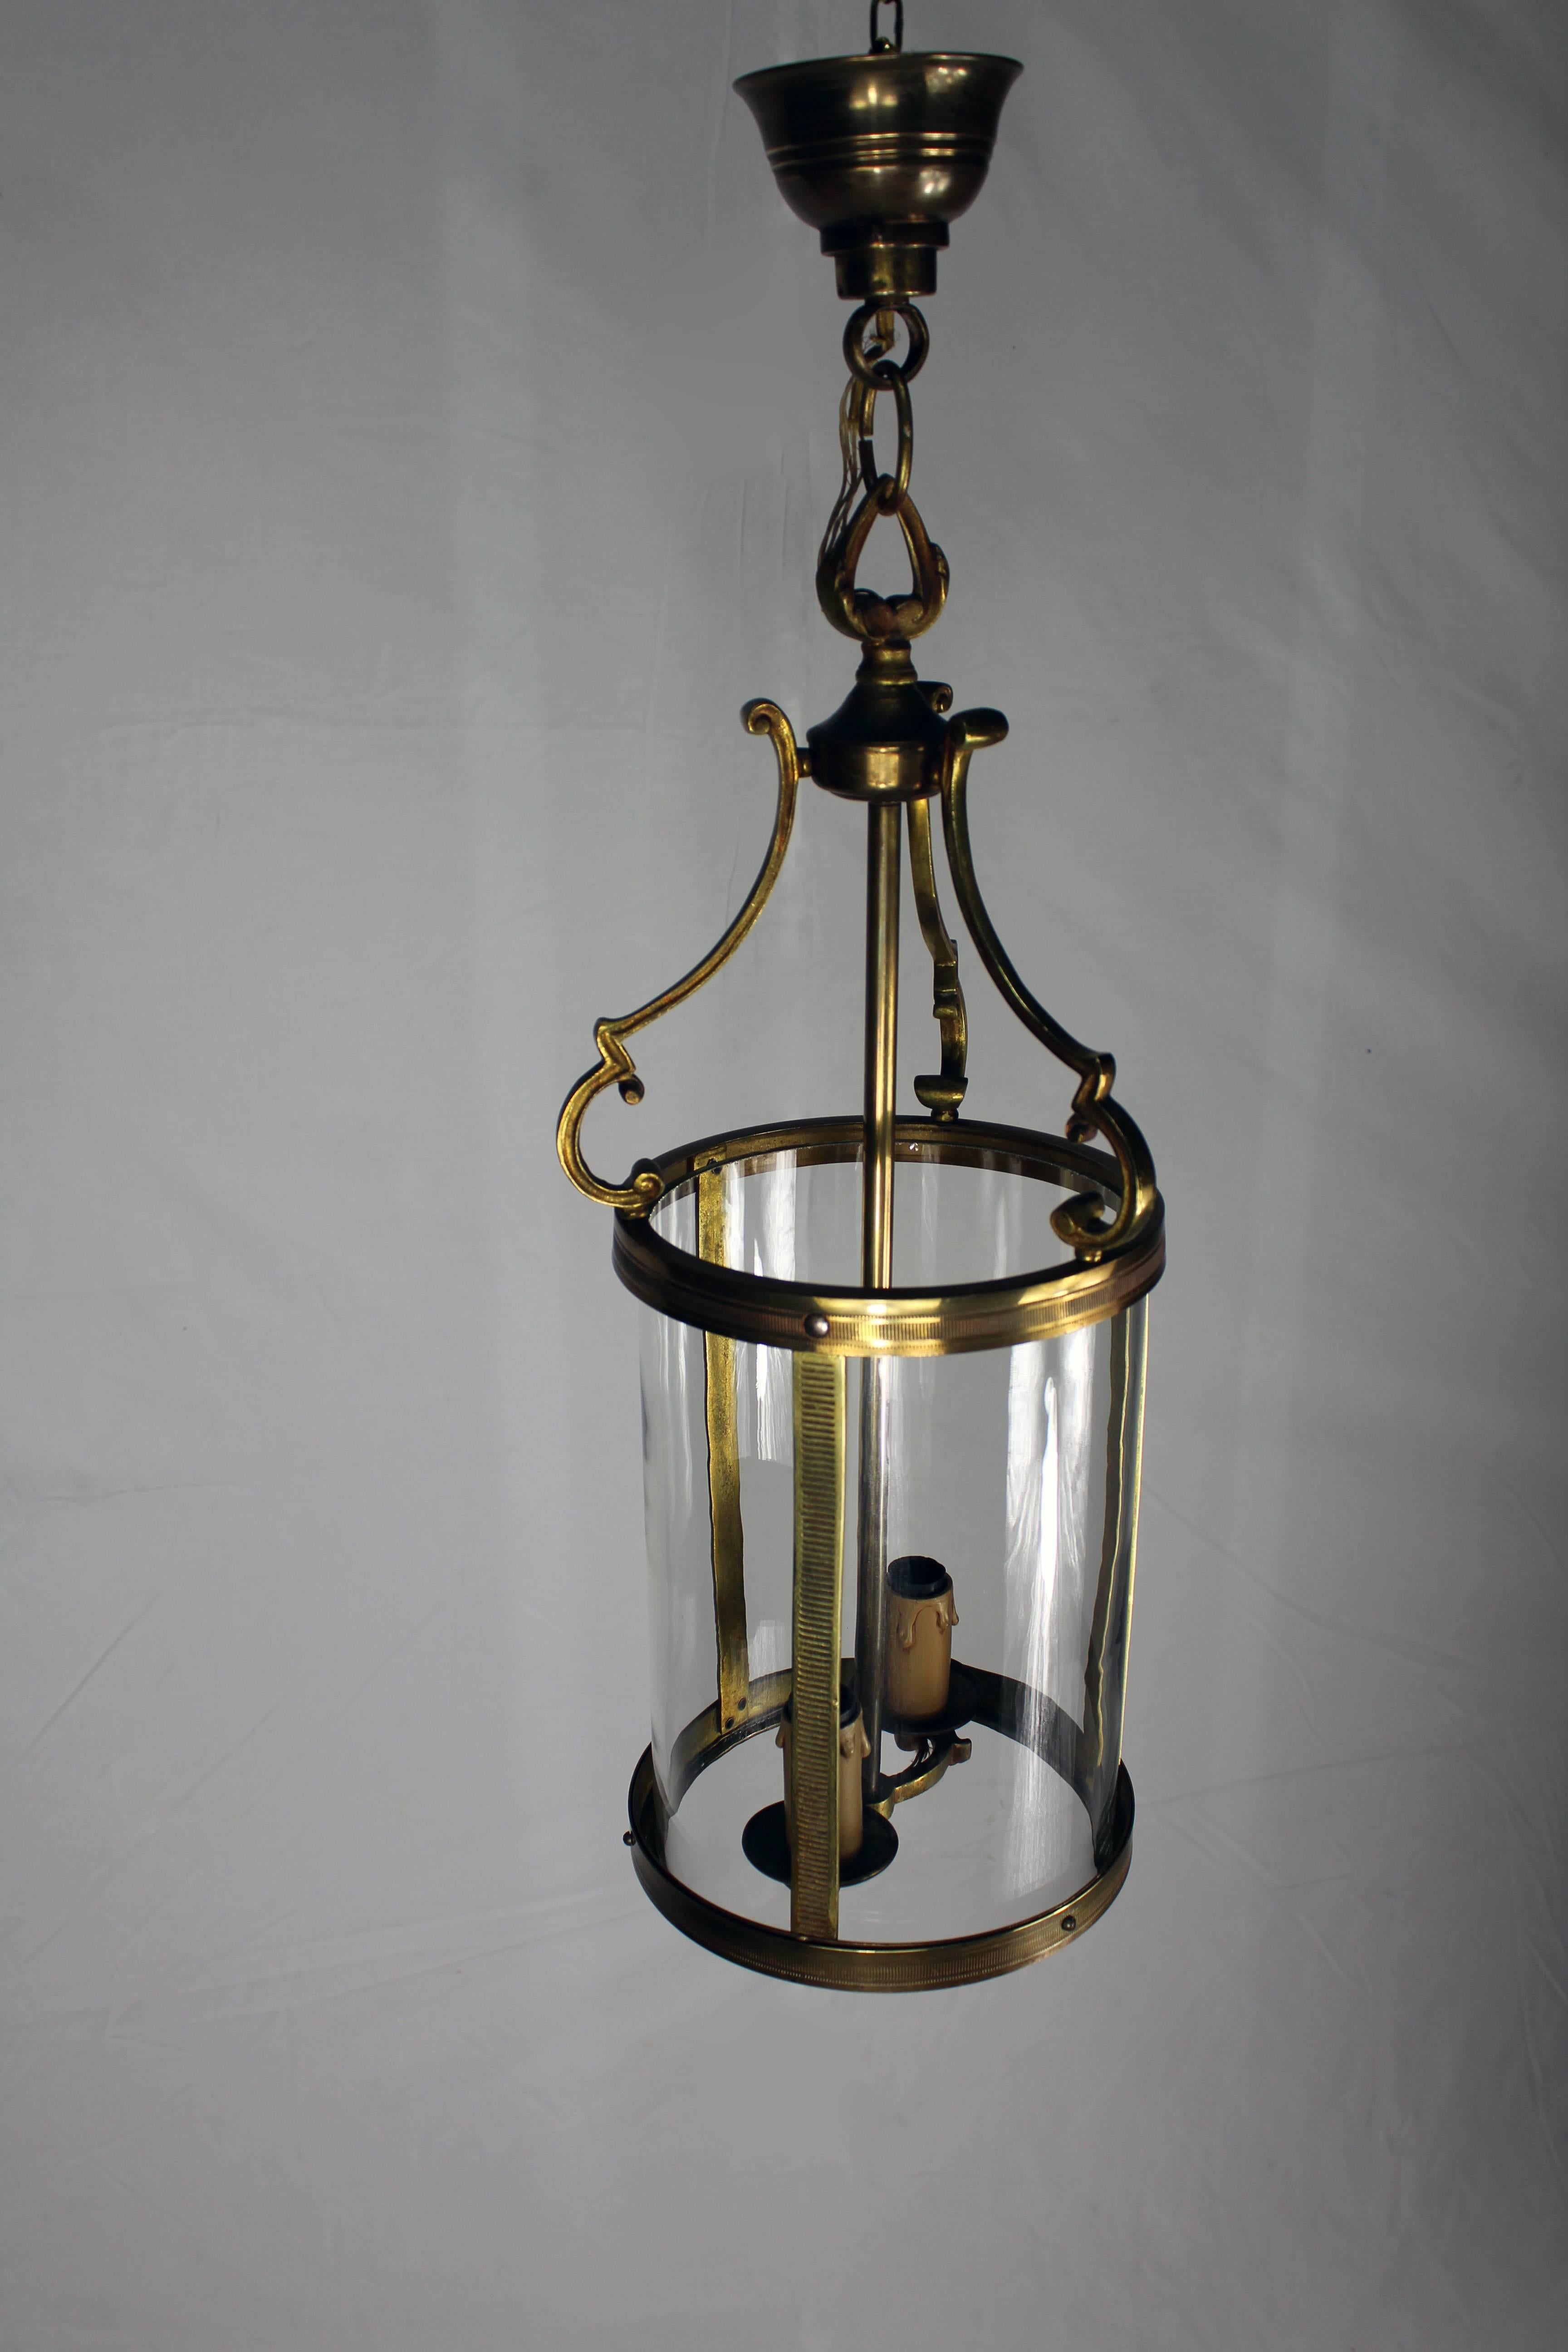 Lantern made of brass and glass. Made in France, circa 1950. 
Good conditions.